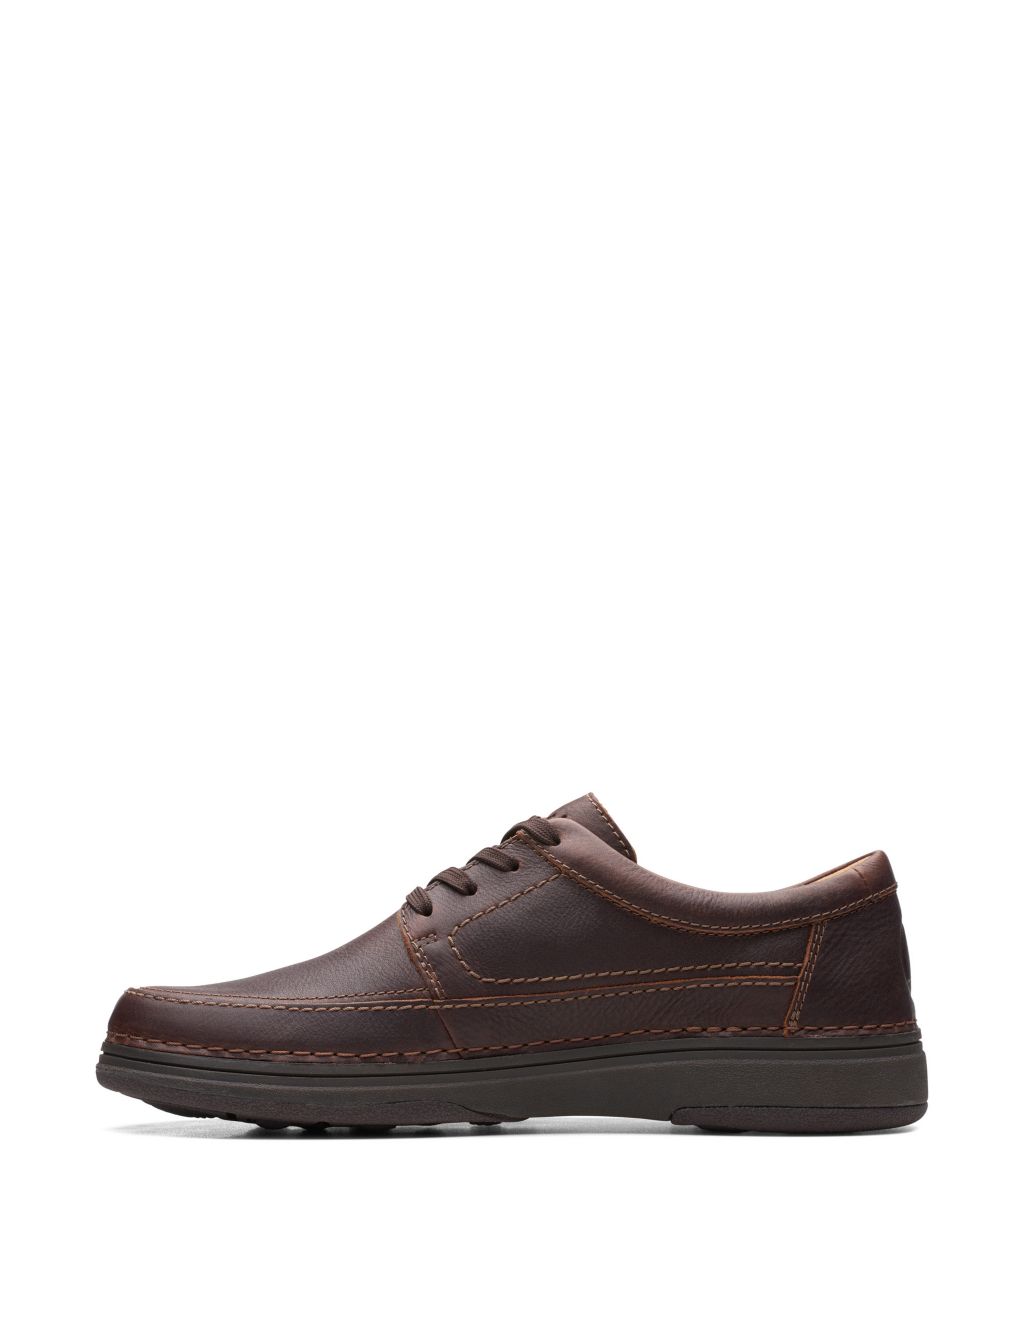 Leather Casual Shoes image 6